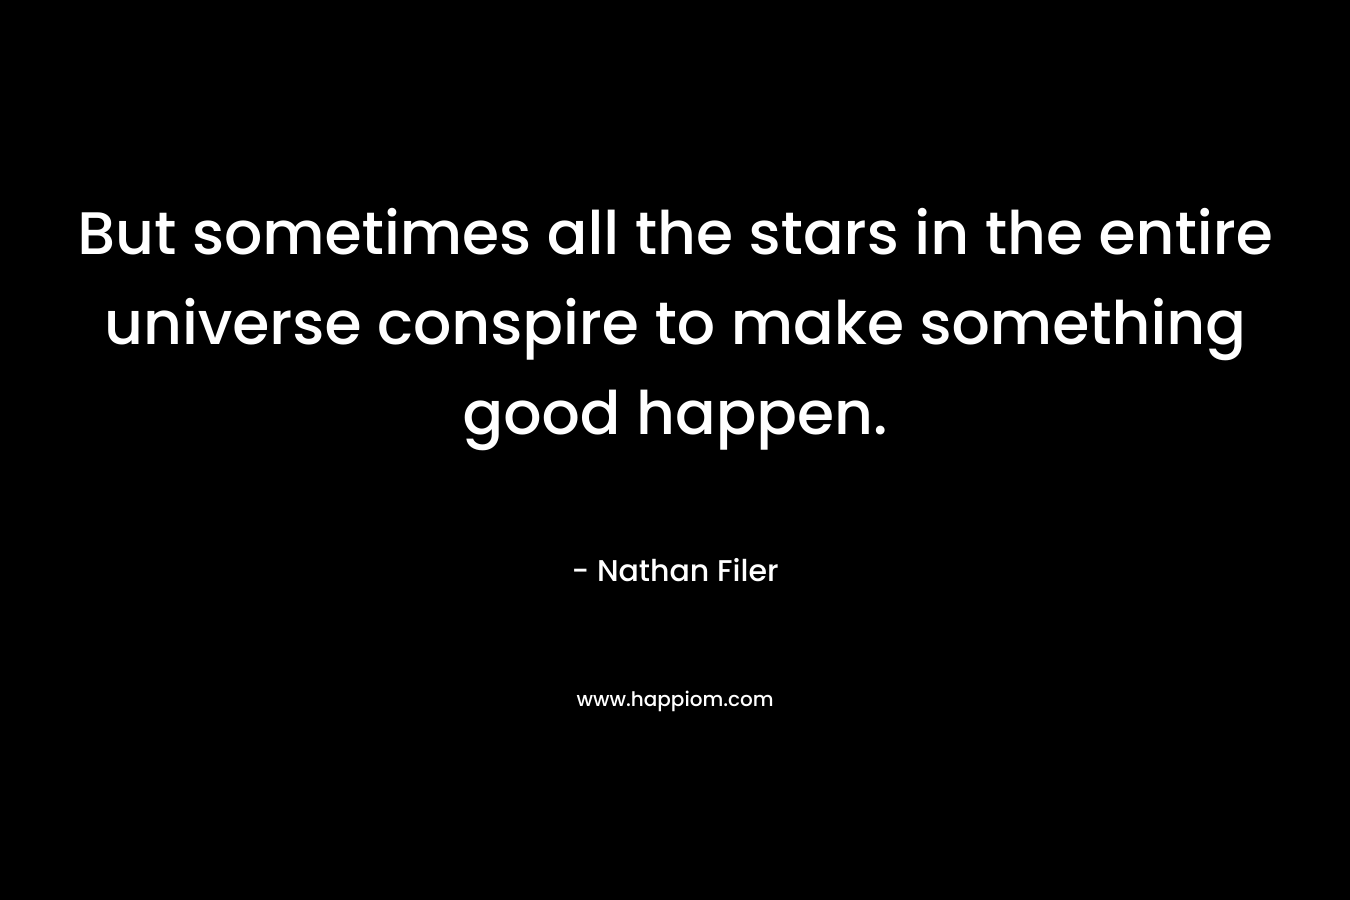 But sometimes all the stars in the entire universe conspire to make something good happen. – Nathan Filer